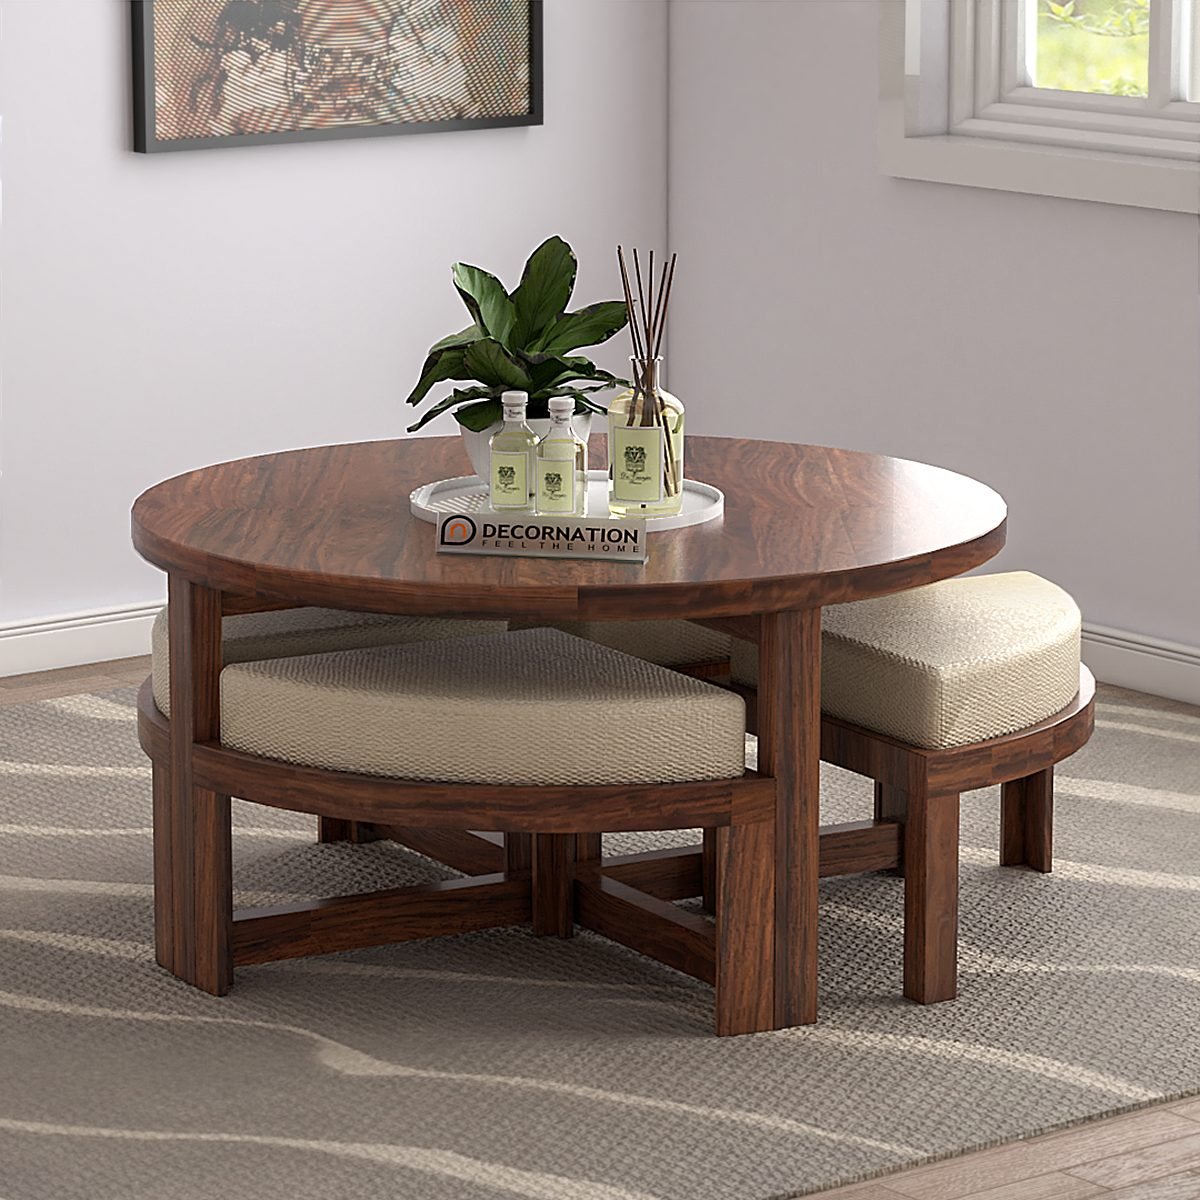 Exeter Circular Coffee Table with 4 Stools – Natural Finish